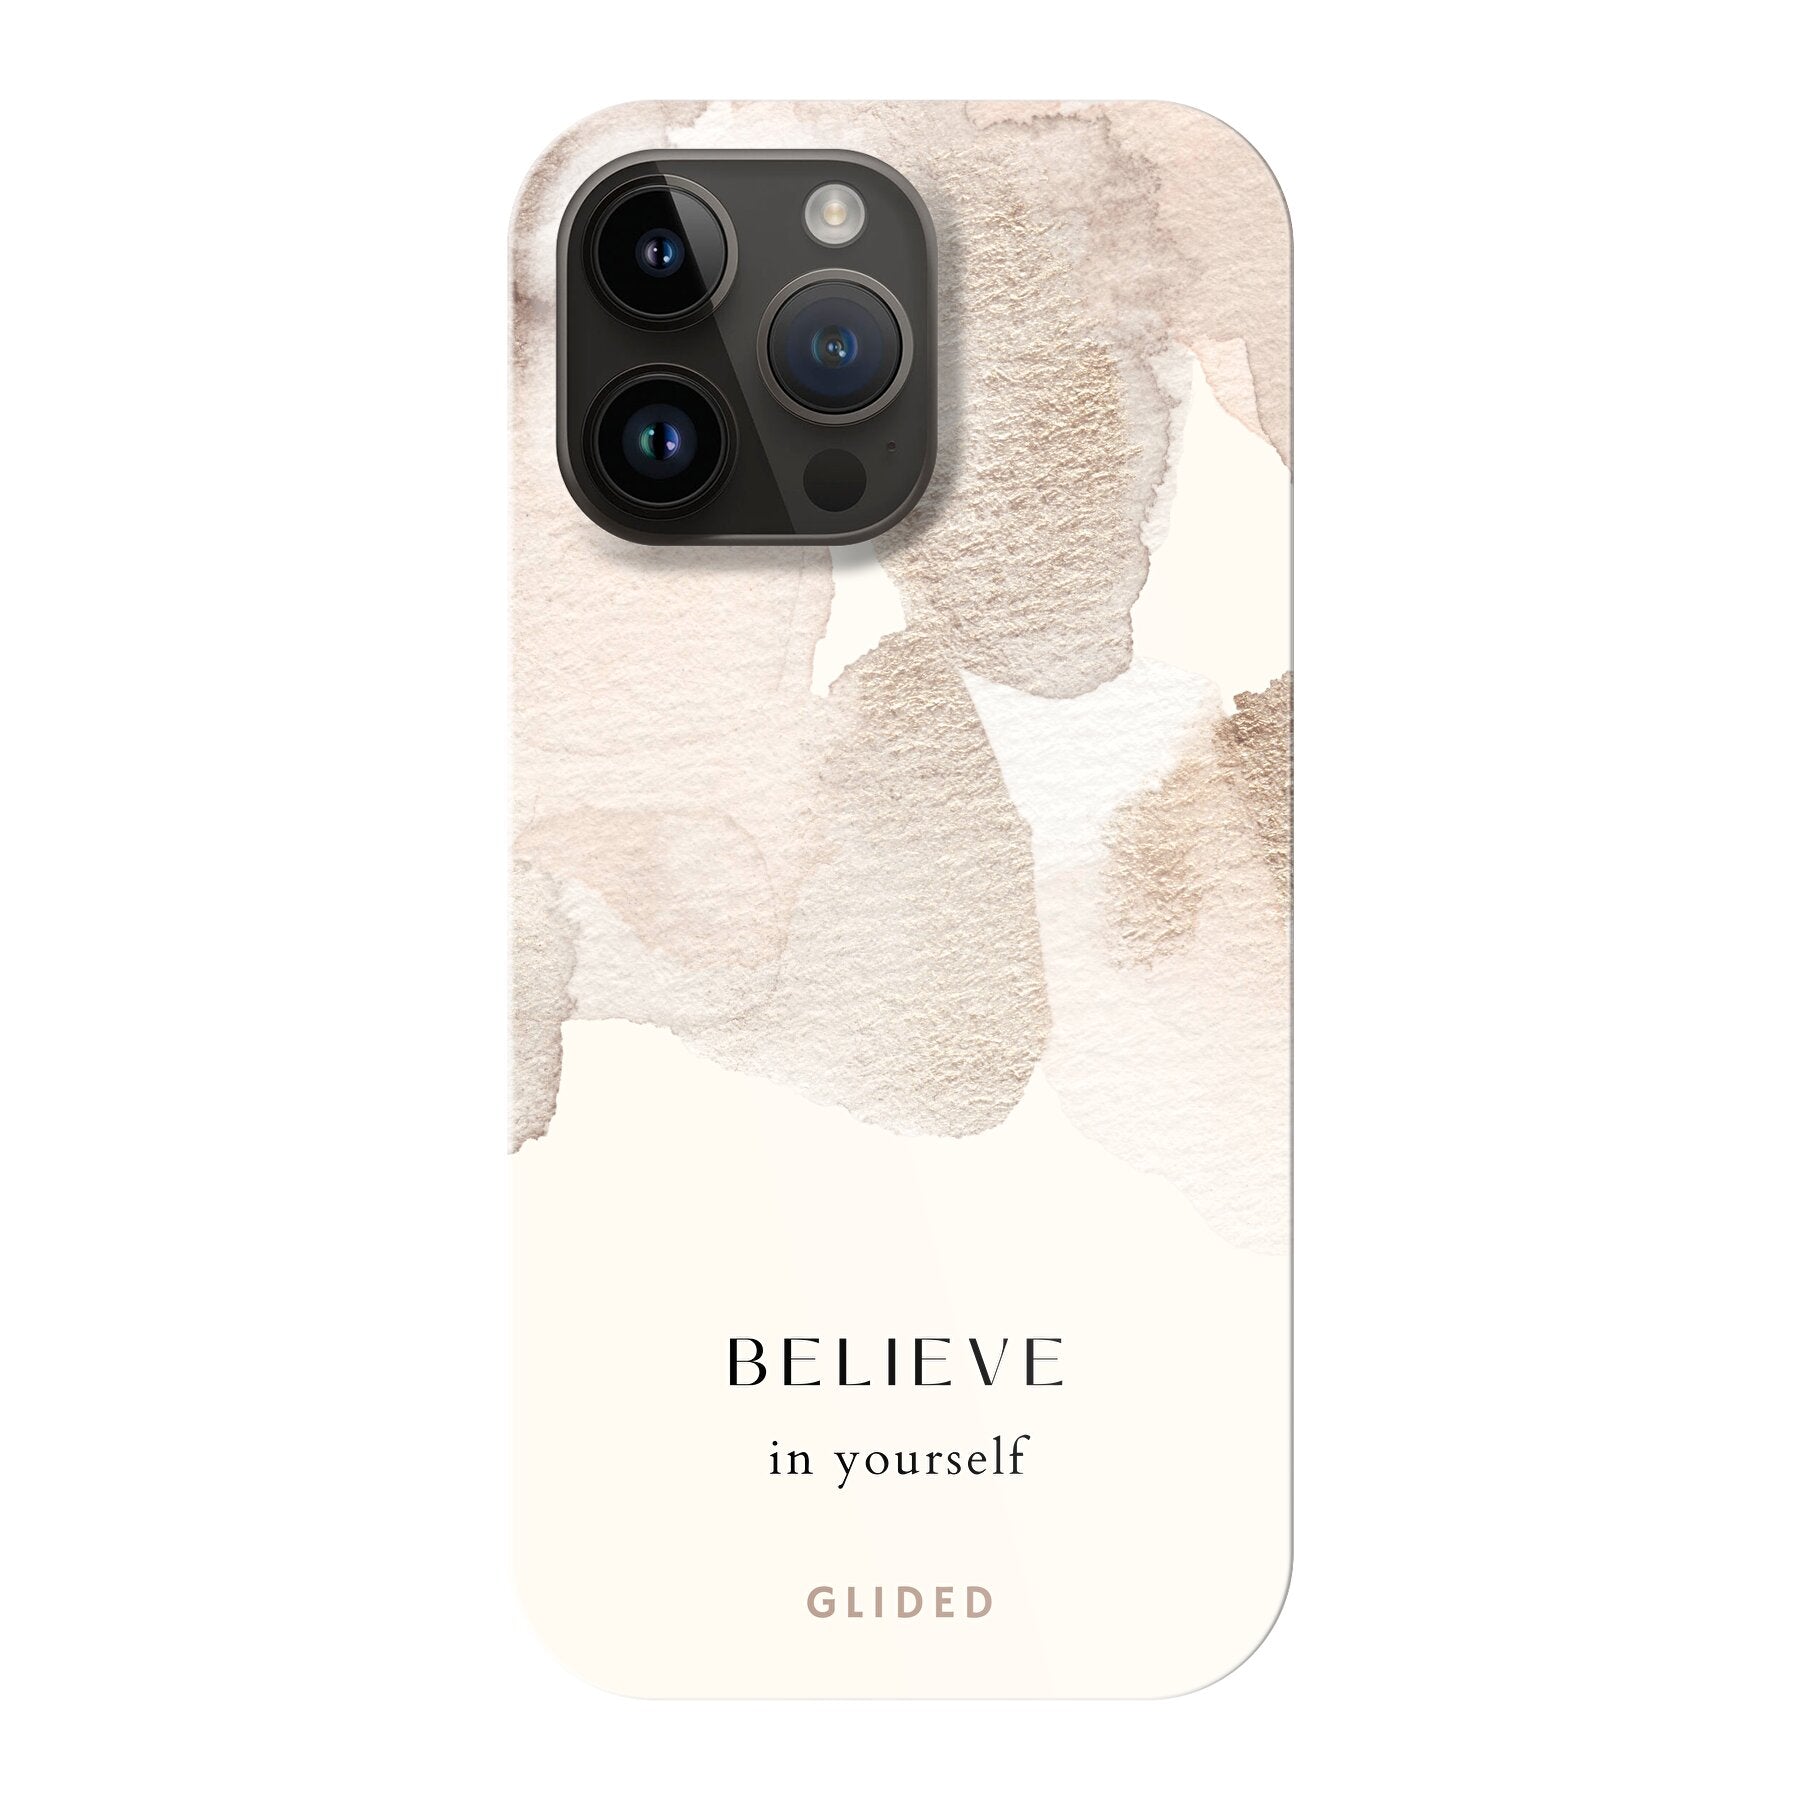 Believe in yourself - iPhone 14 Pro Max Handyhülle Hard Case